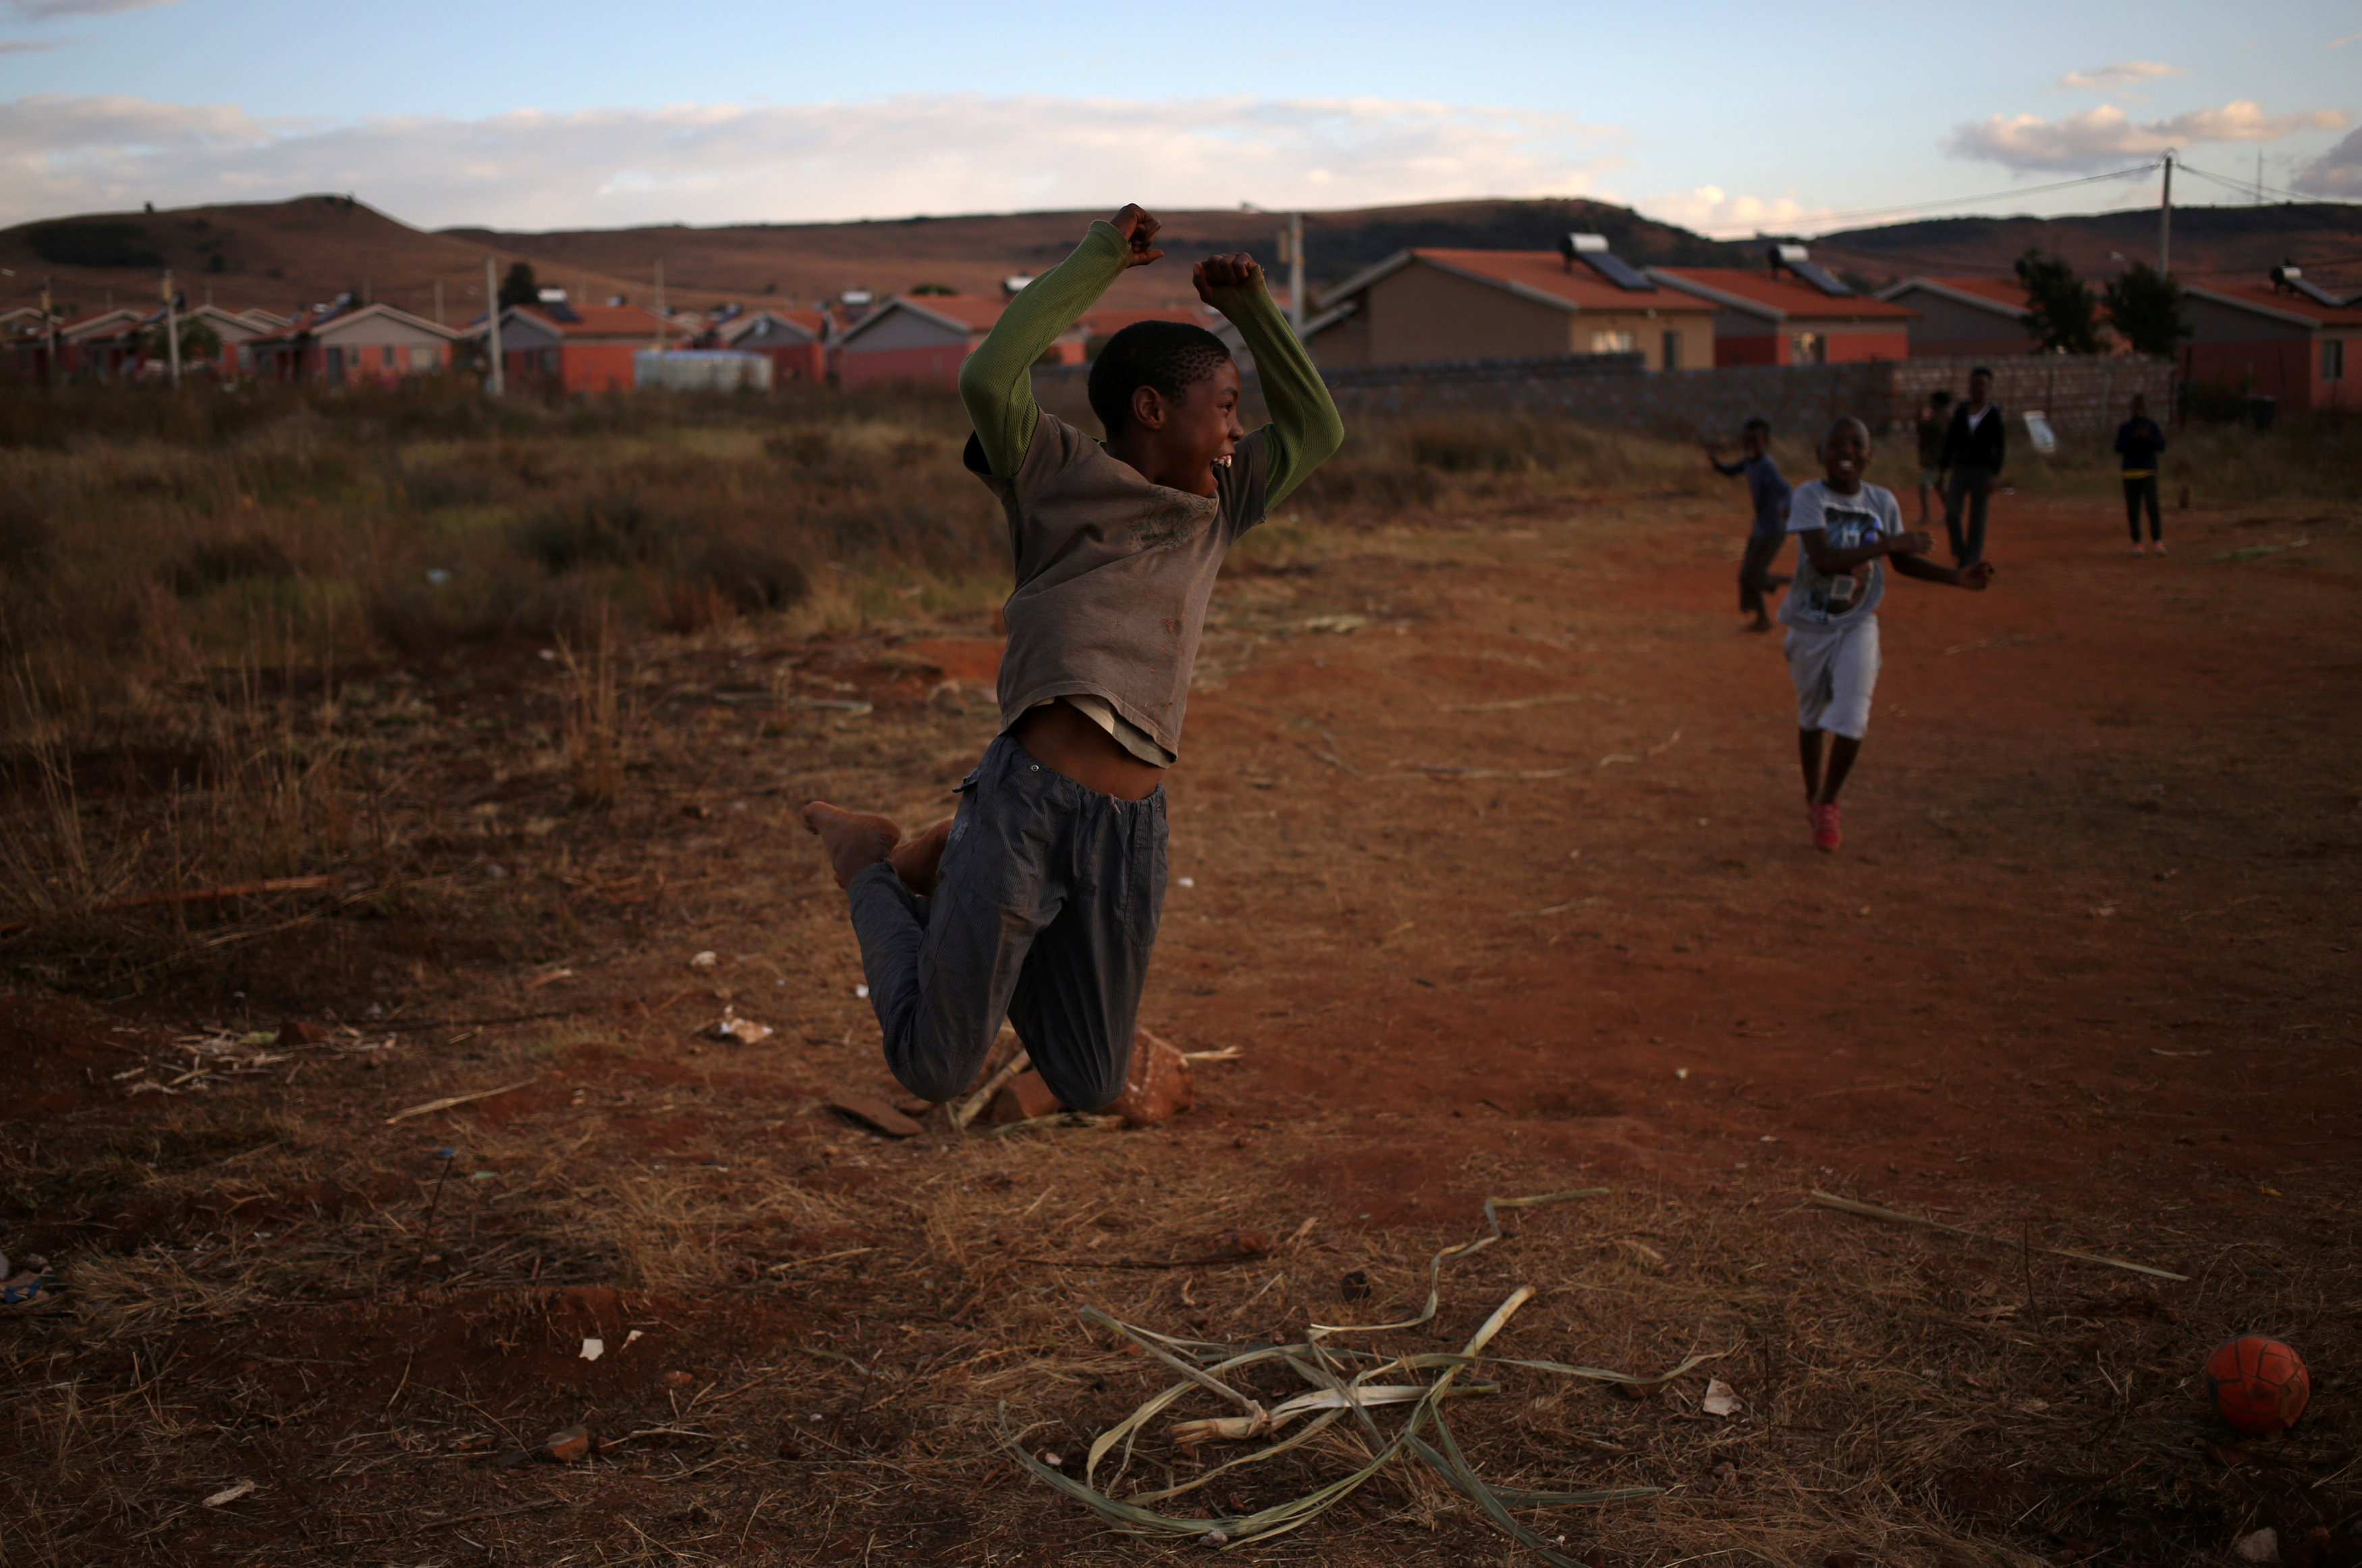 Kamohelo Kabi celebrates scoring his 6th goal during a soccer game at Lehae township, South-west of Johannesburg